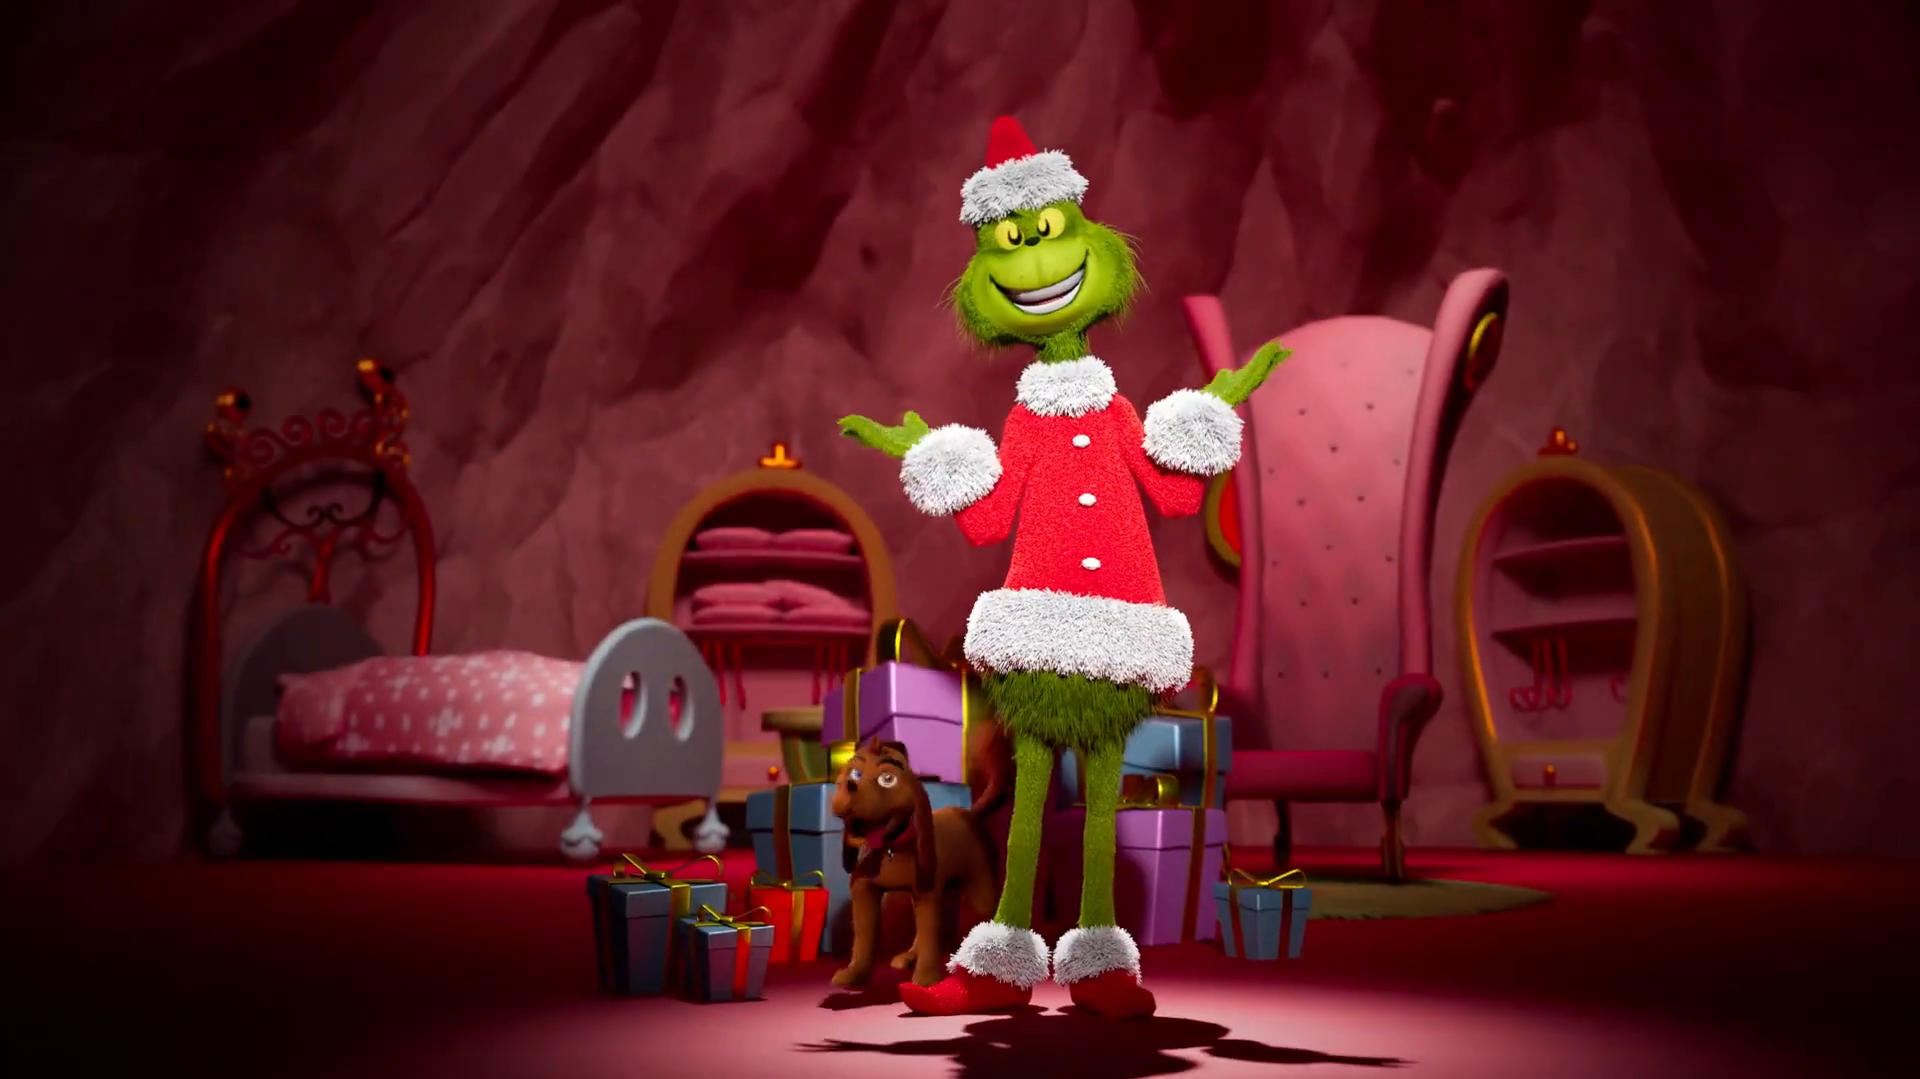 The Grinch is headlining a grumpy new Christmas adventure The